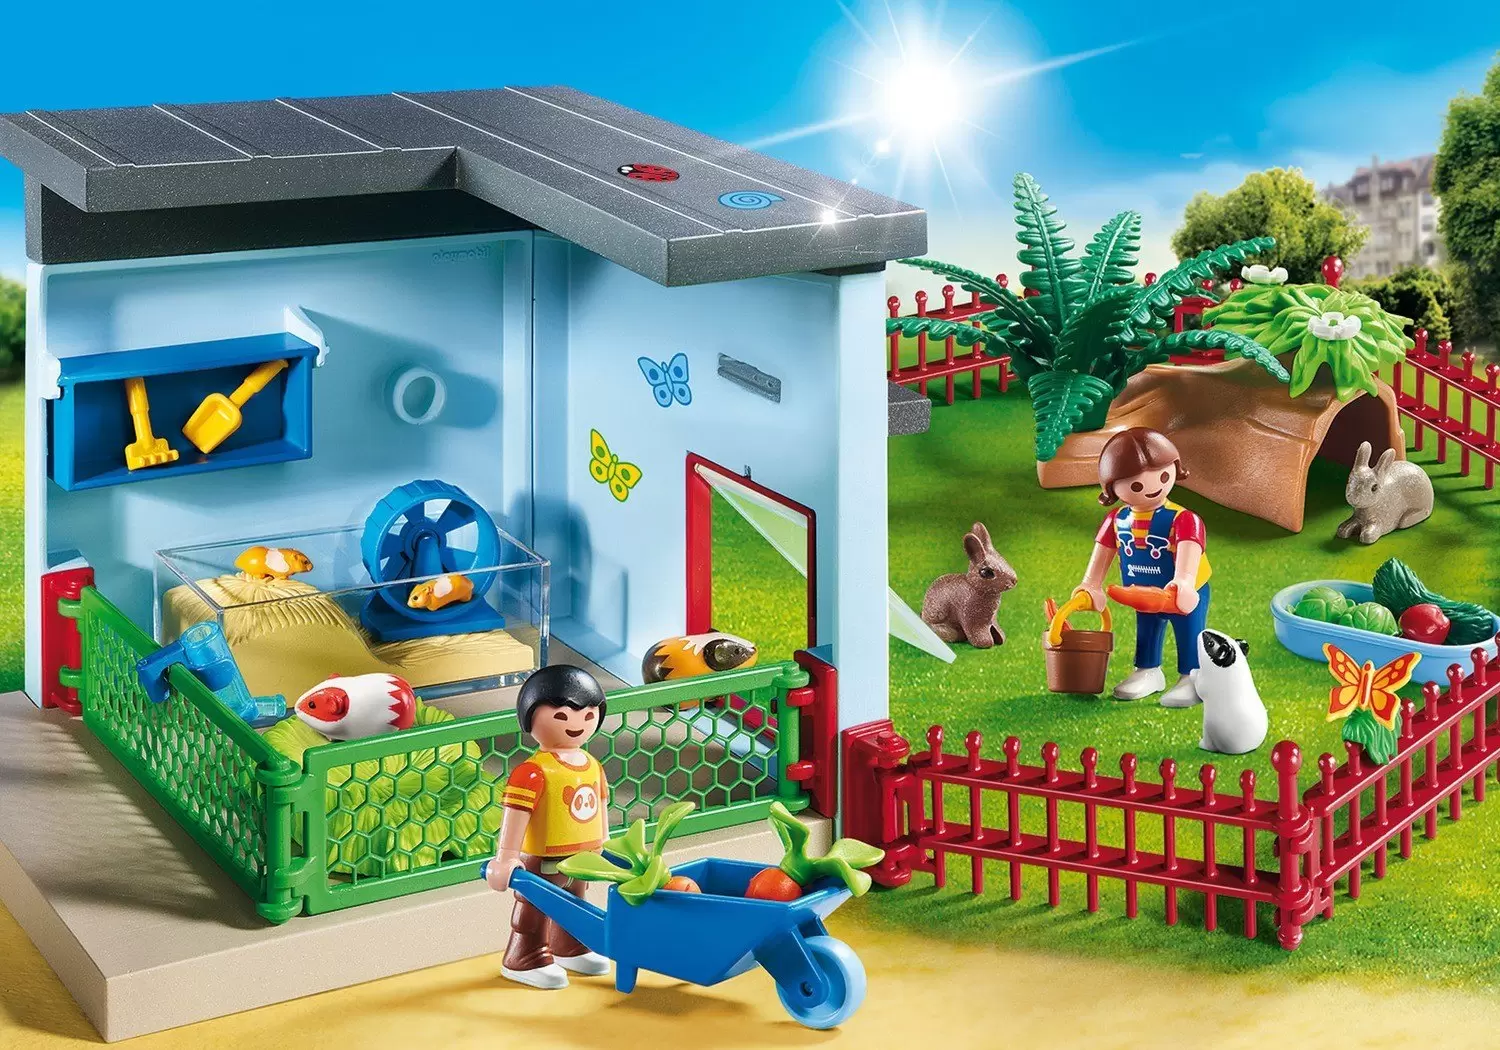 Playmobil in the City - Small Animal House